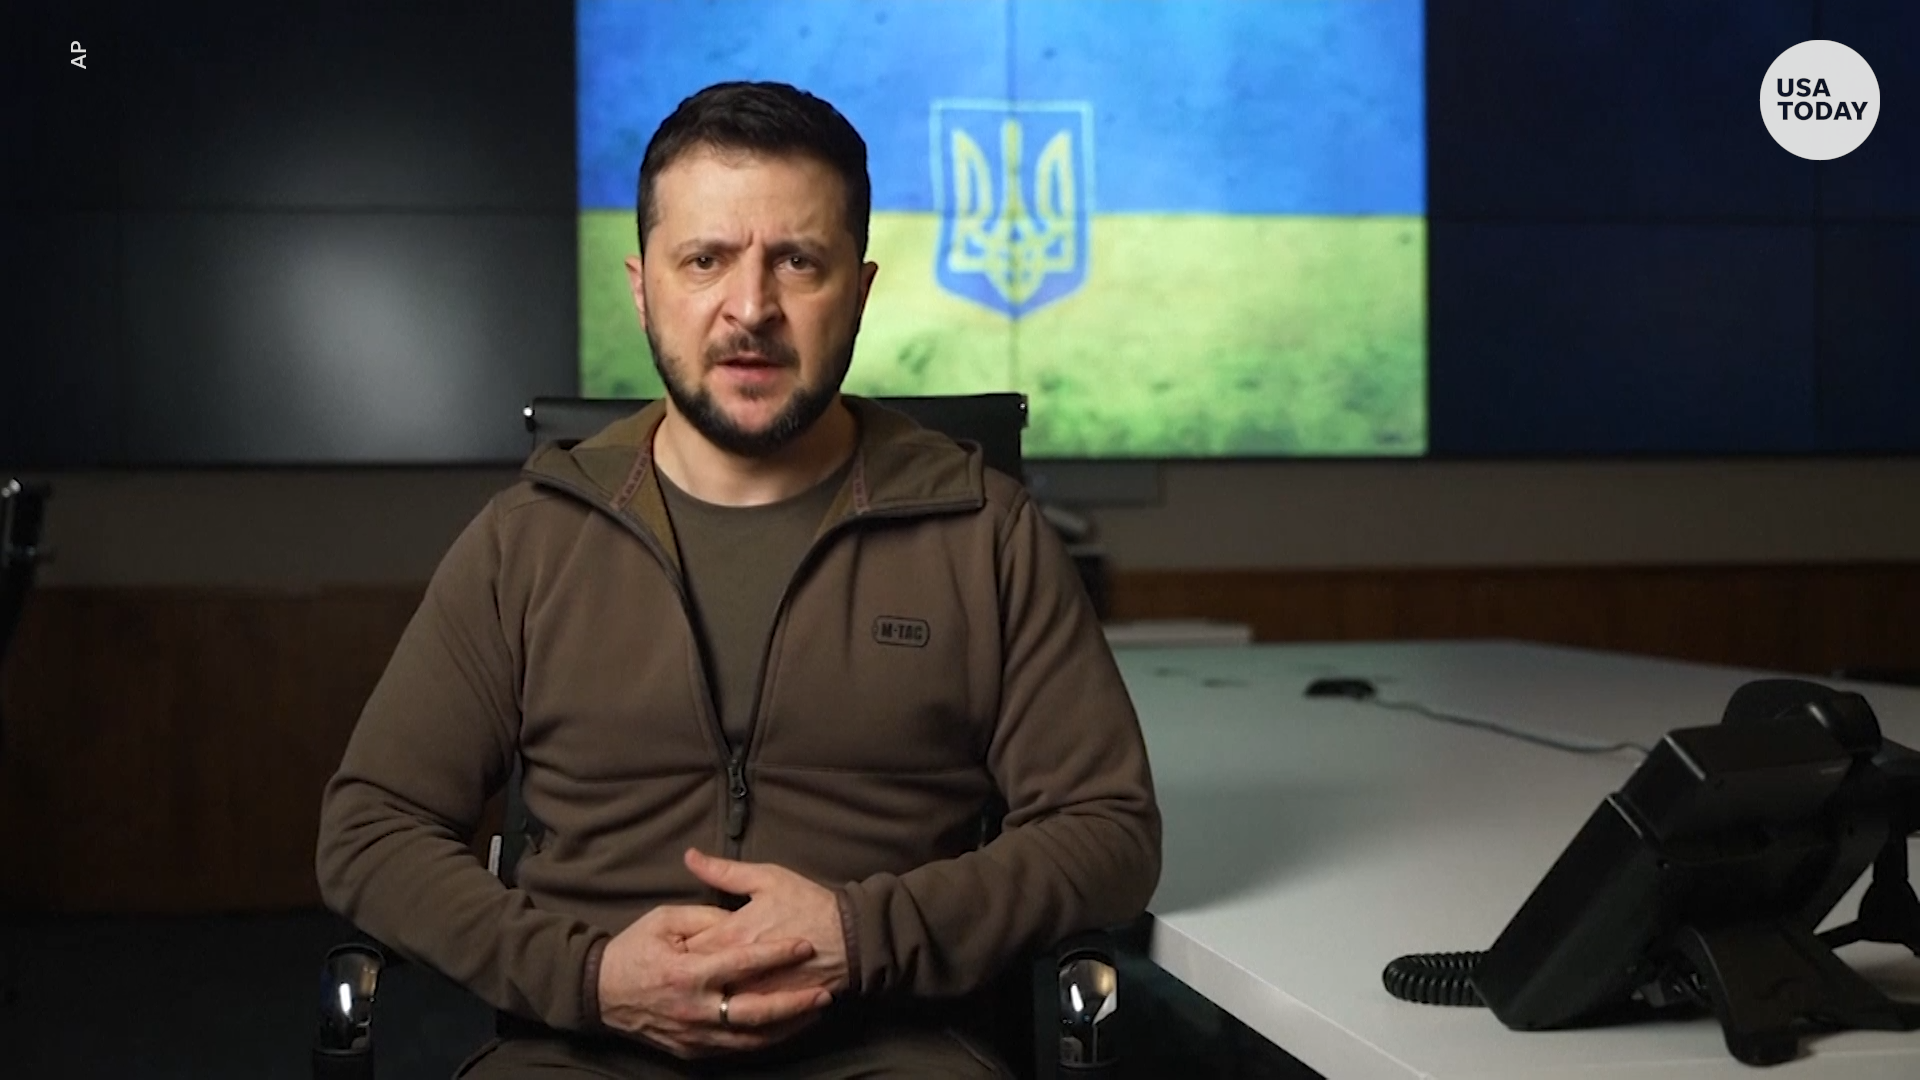 Ukraine forces fight to keep Mariupol; Russians likely exposed to radiation at Chernobyl: April 20 recap thumbnail